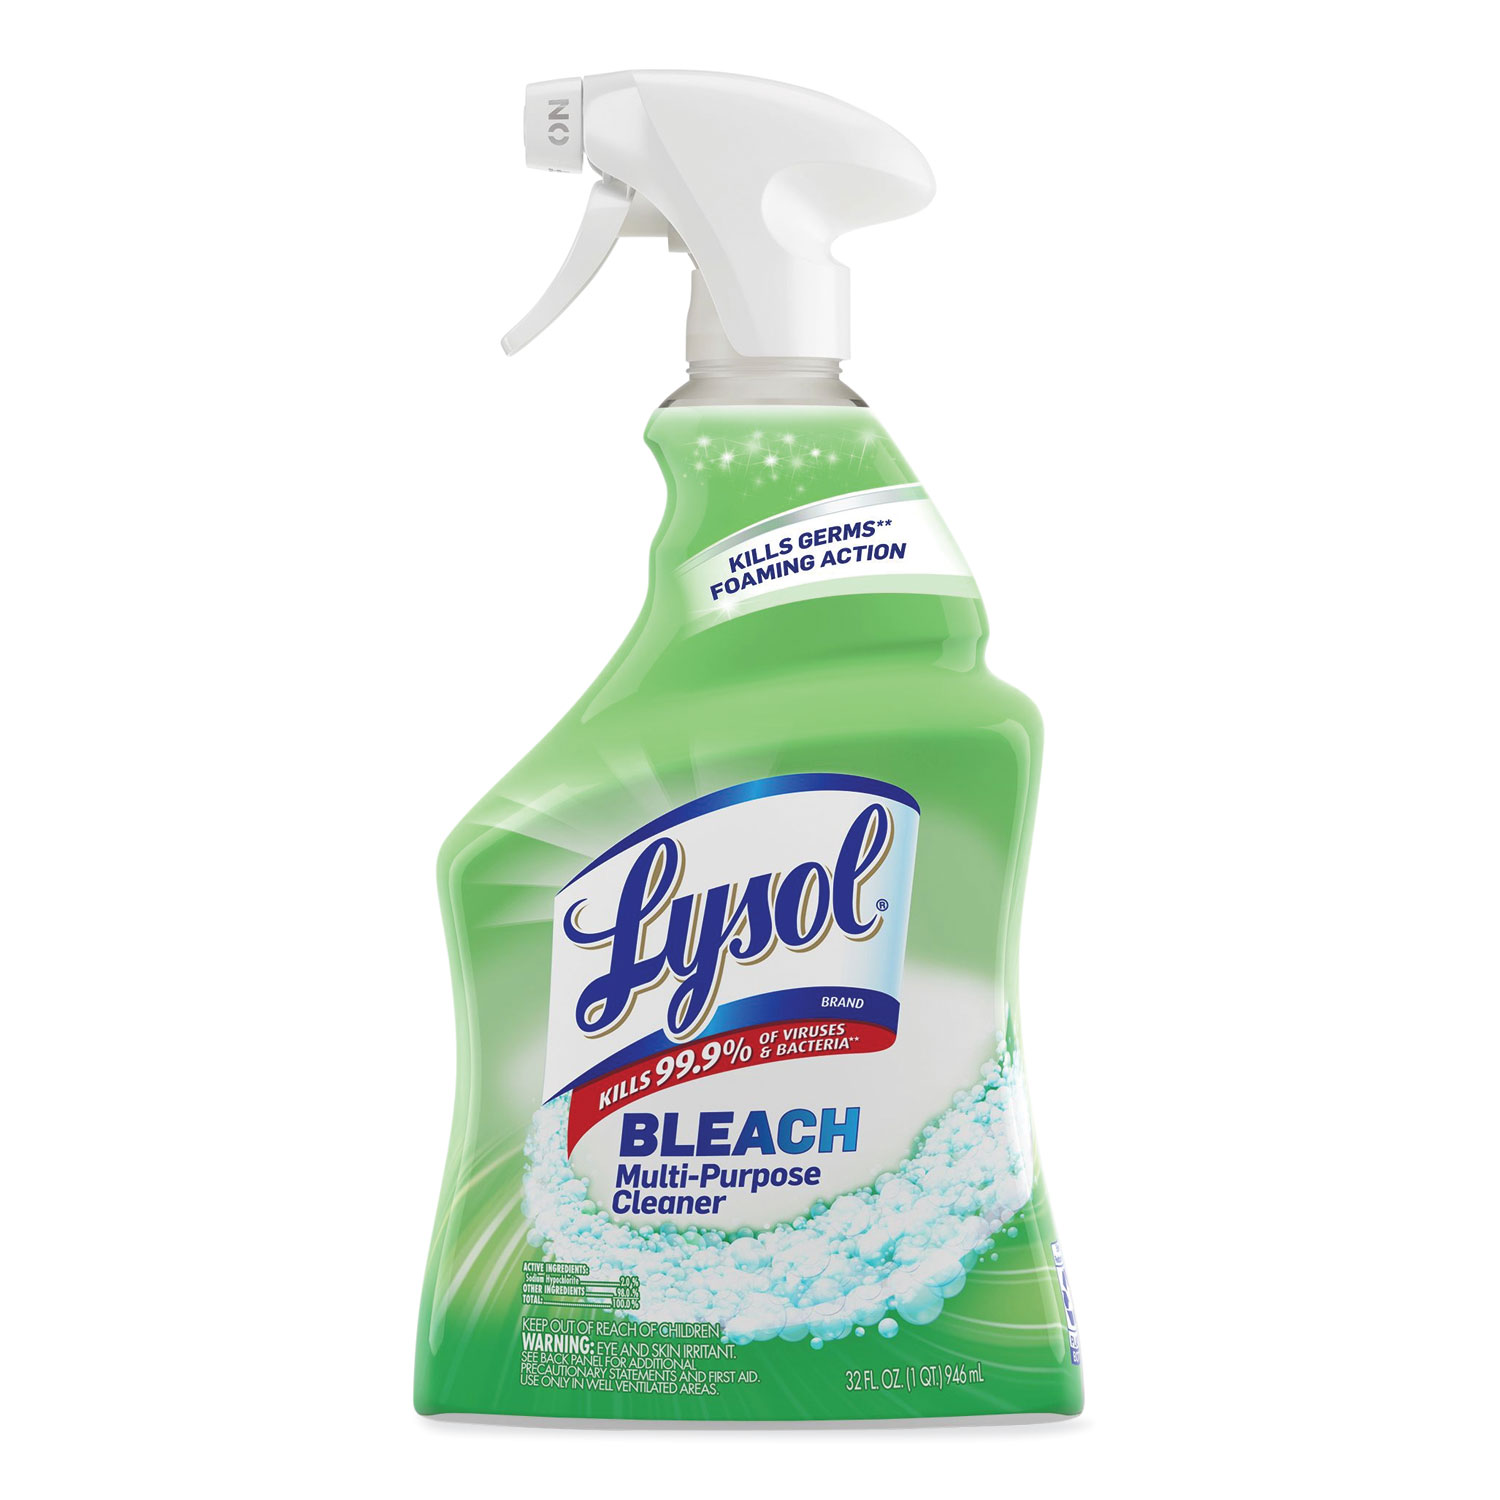 Lysol Mold & Mildew Remover with Bleach